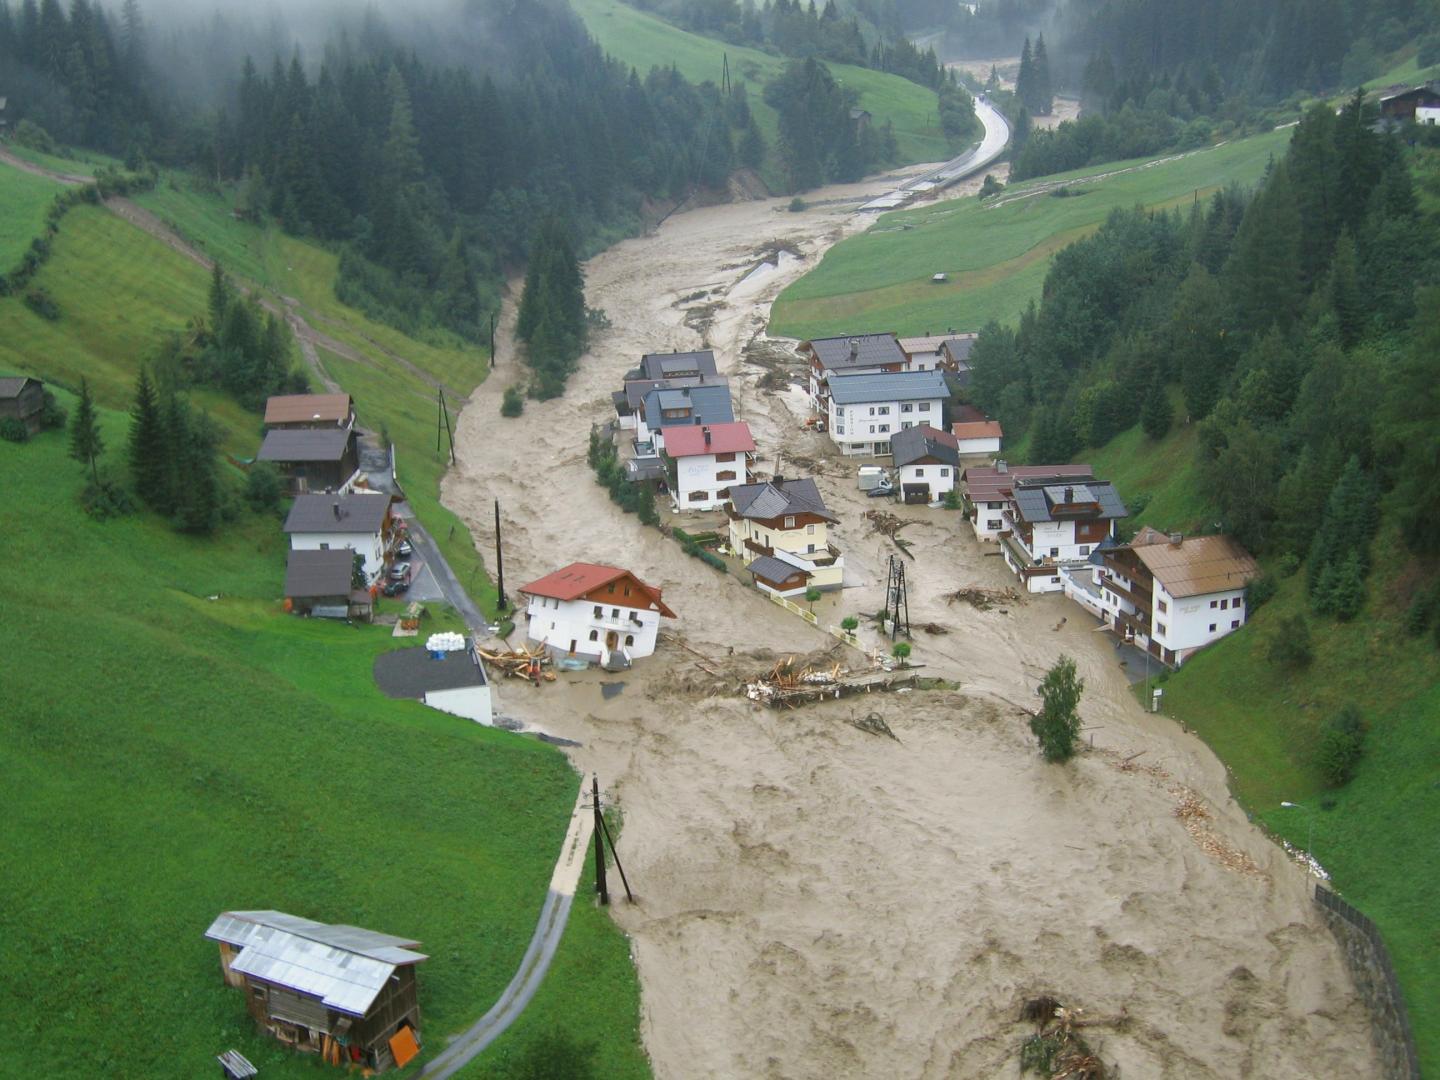 Climate Change Means Earlier Spring Flooding for Parts of Europe...